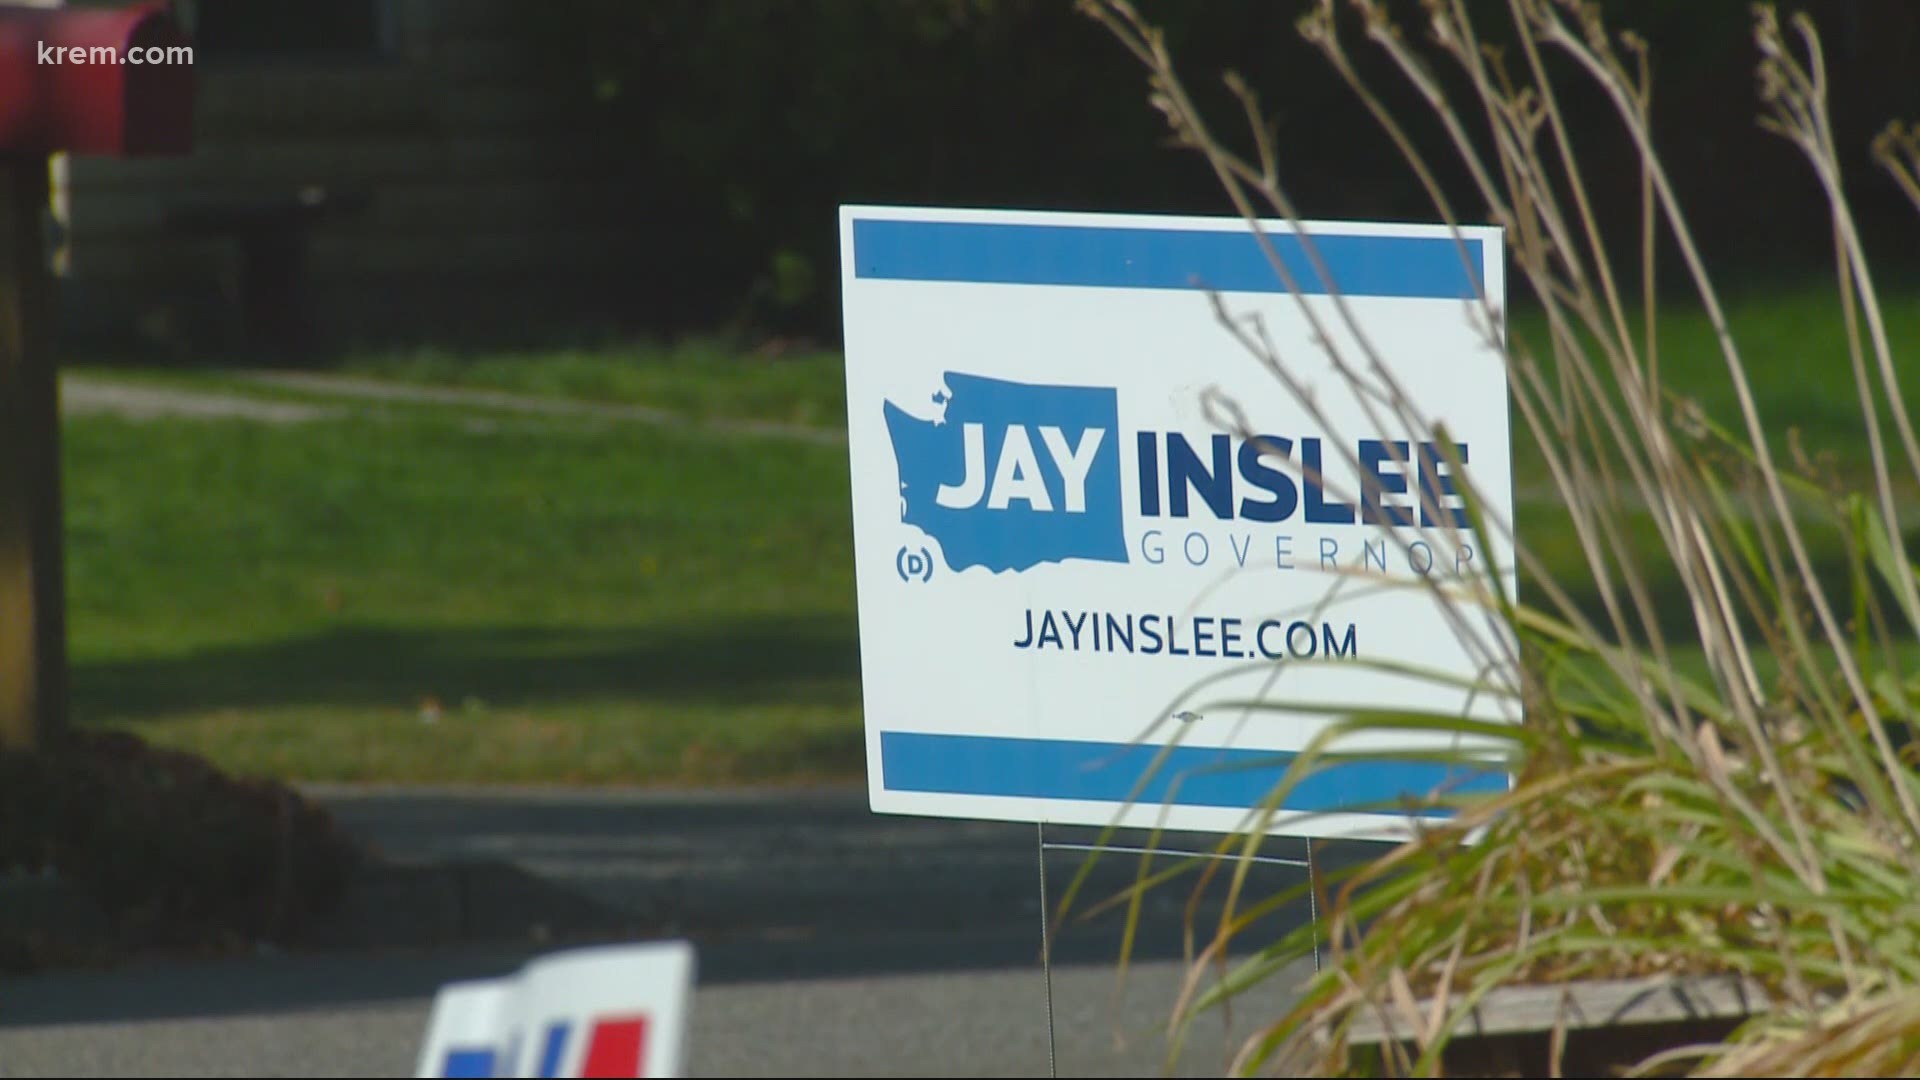 With election season in full swing, many KREM viewers have asked if their landlords can make them take down political campaign signs.